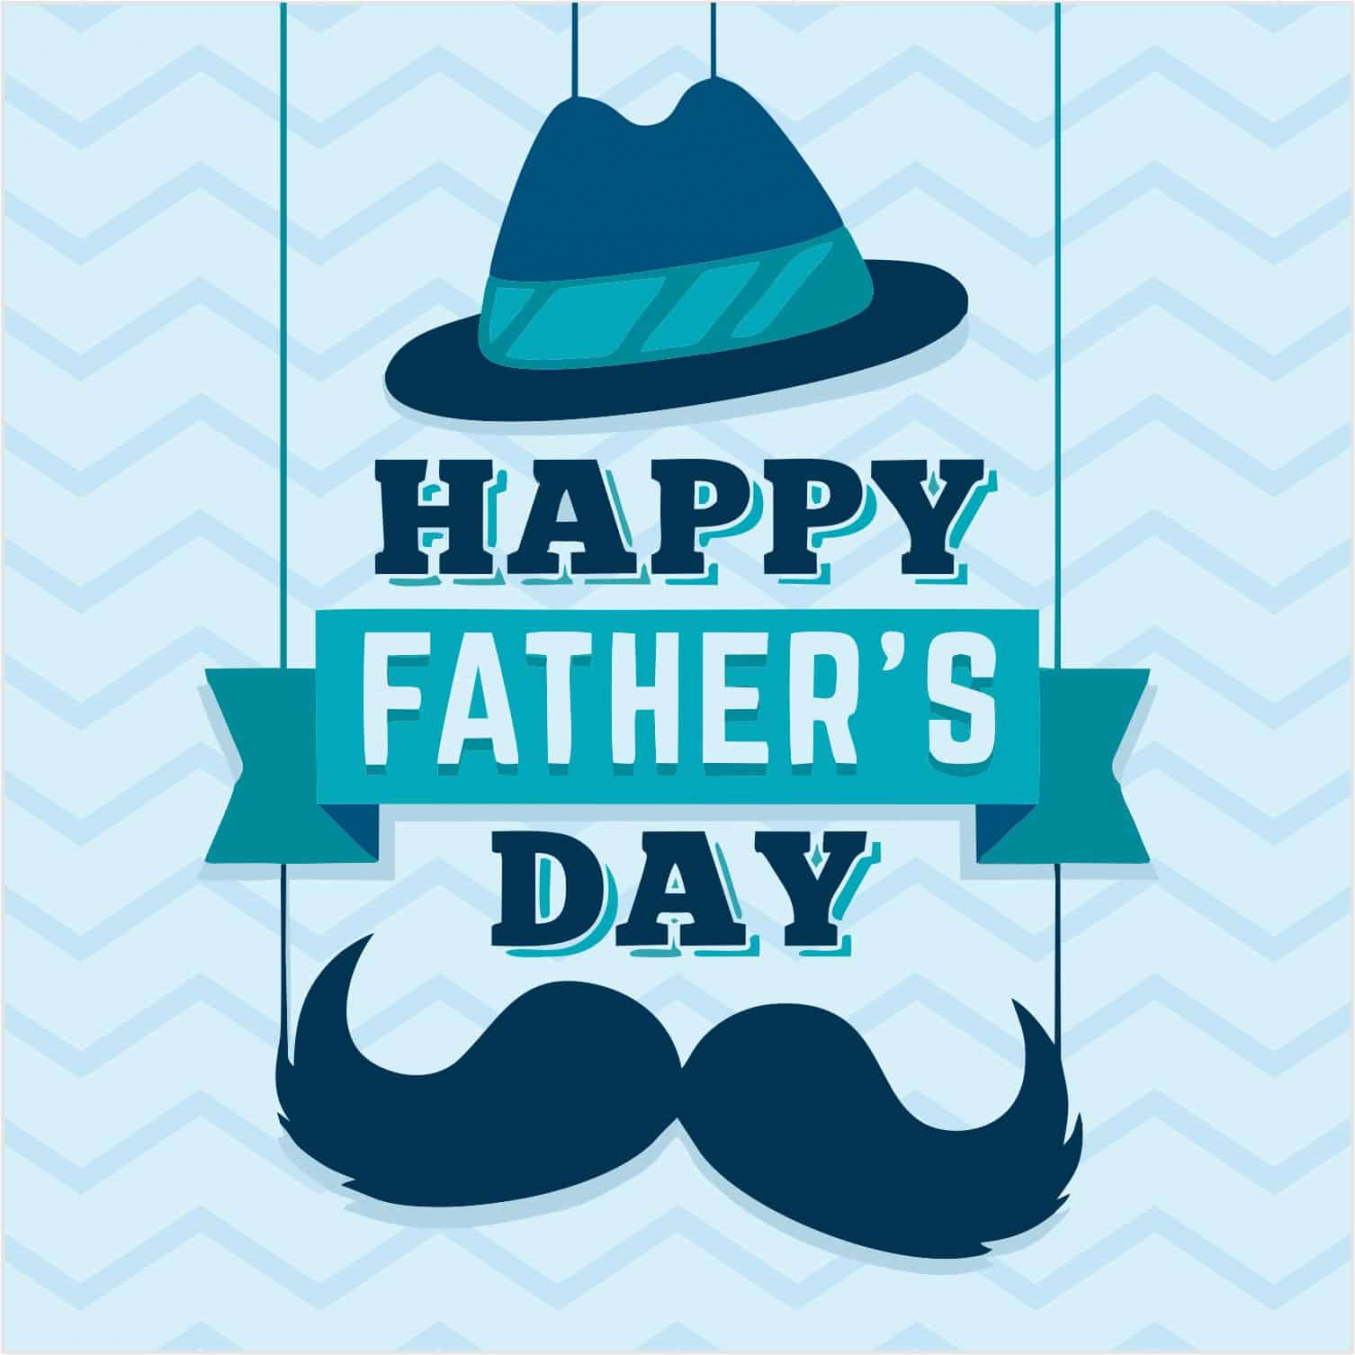 Free Printable Happy Fathers Day Images - Printable - Free Printable Father